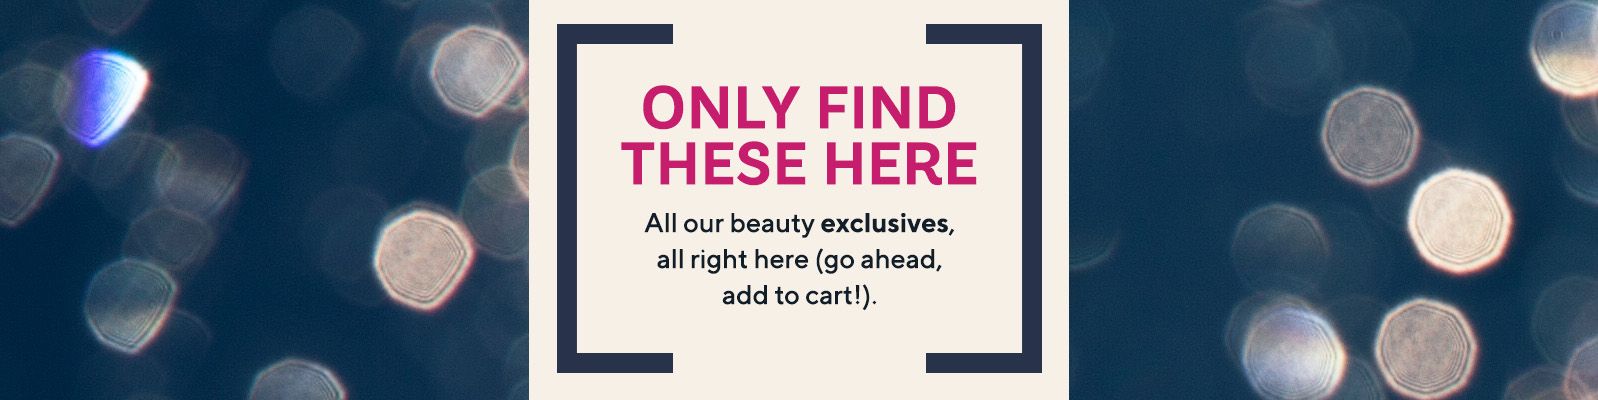 Only Find These Here - All our beauty exclusives, all right here (go ahead, add to cart!).